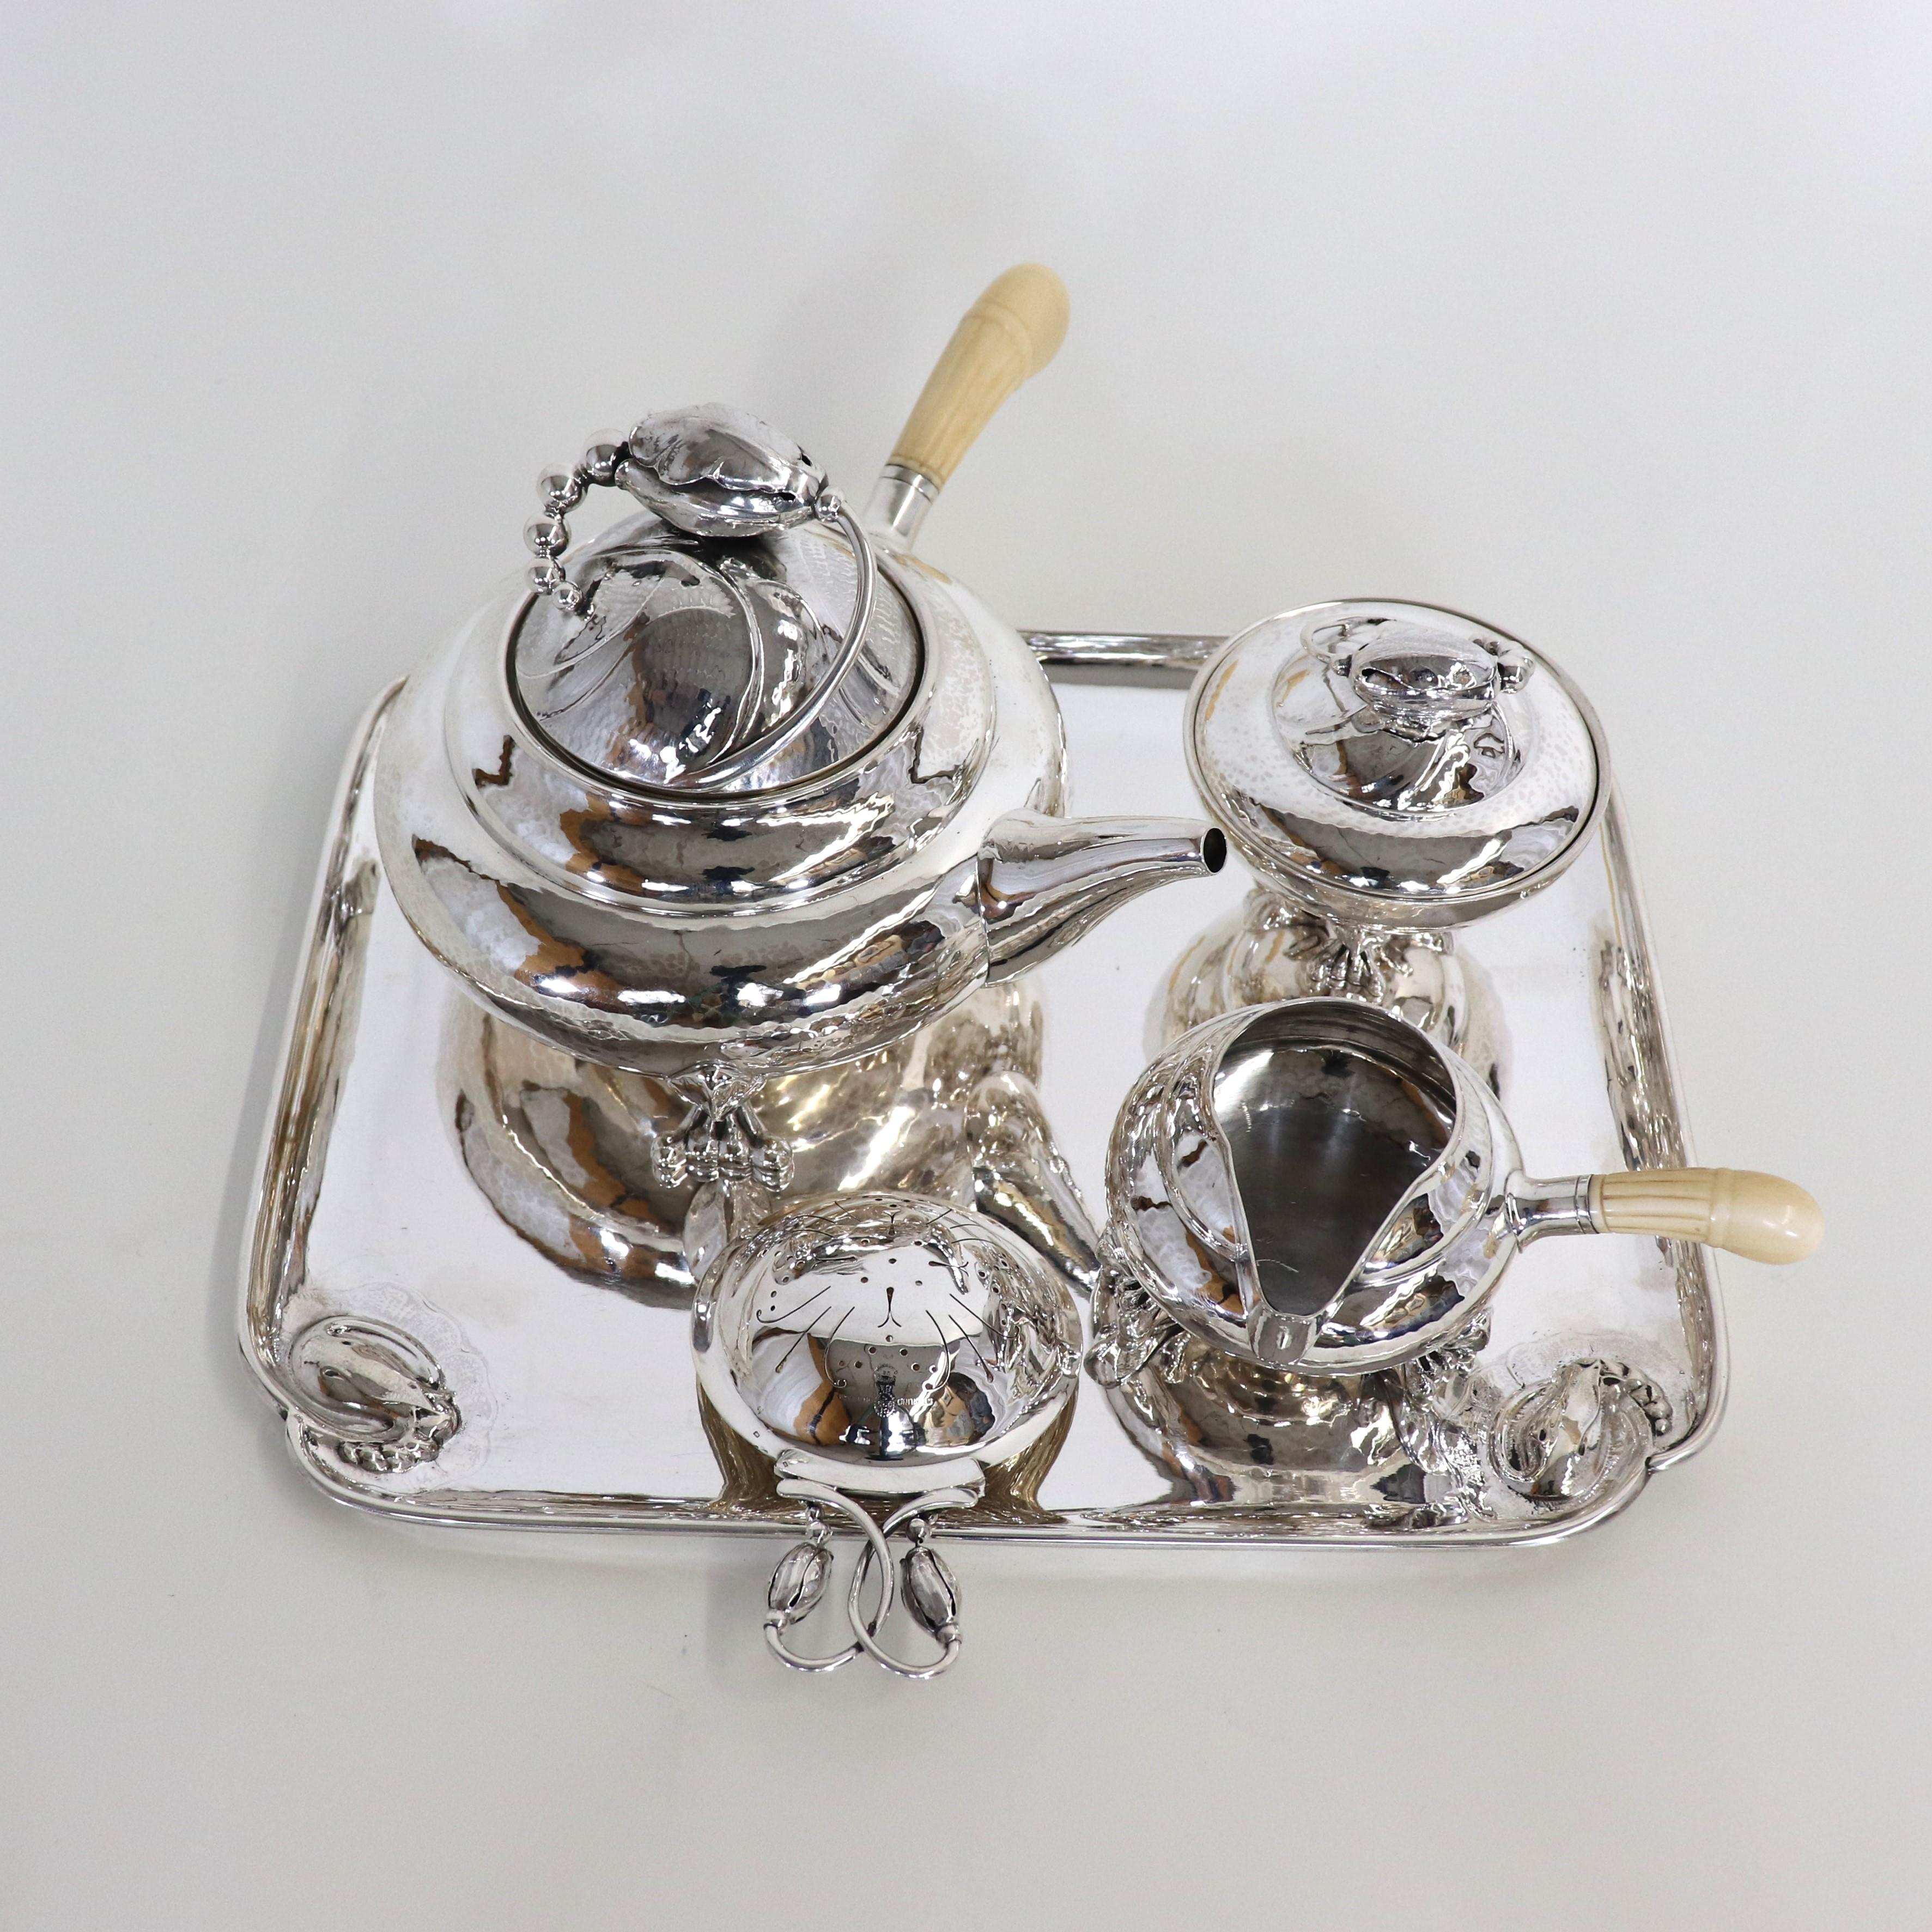 This exquisite and rare Georg Jensen (1866-1935) tea set is exemplary of the Art Nouveau style gloriously celebrating natural elements, specifically the magnolia blossom. The flower bud was inspired by Japanese art, which uses the magnolia bud and